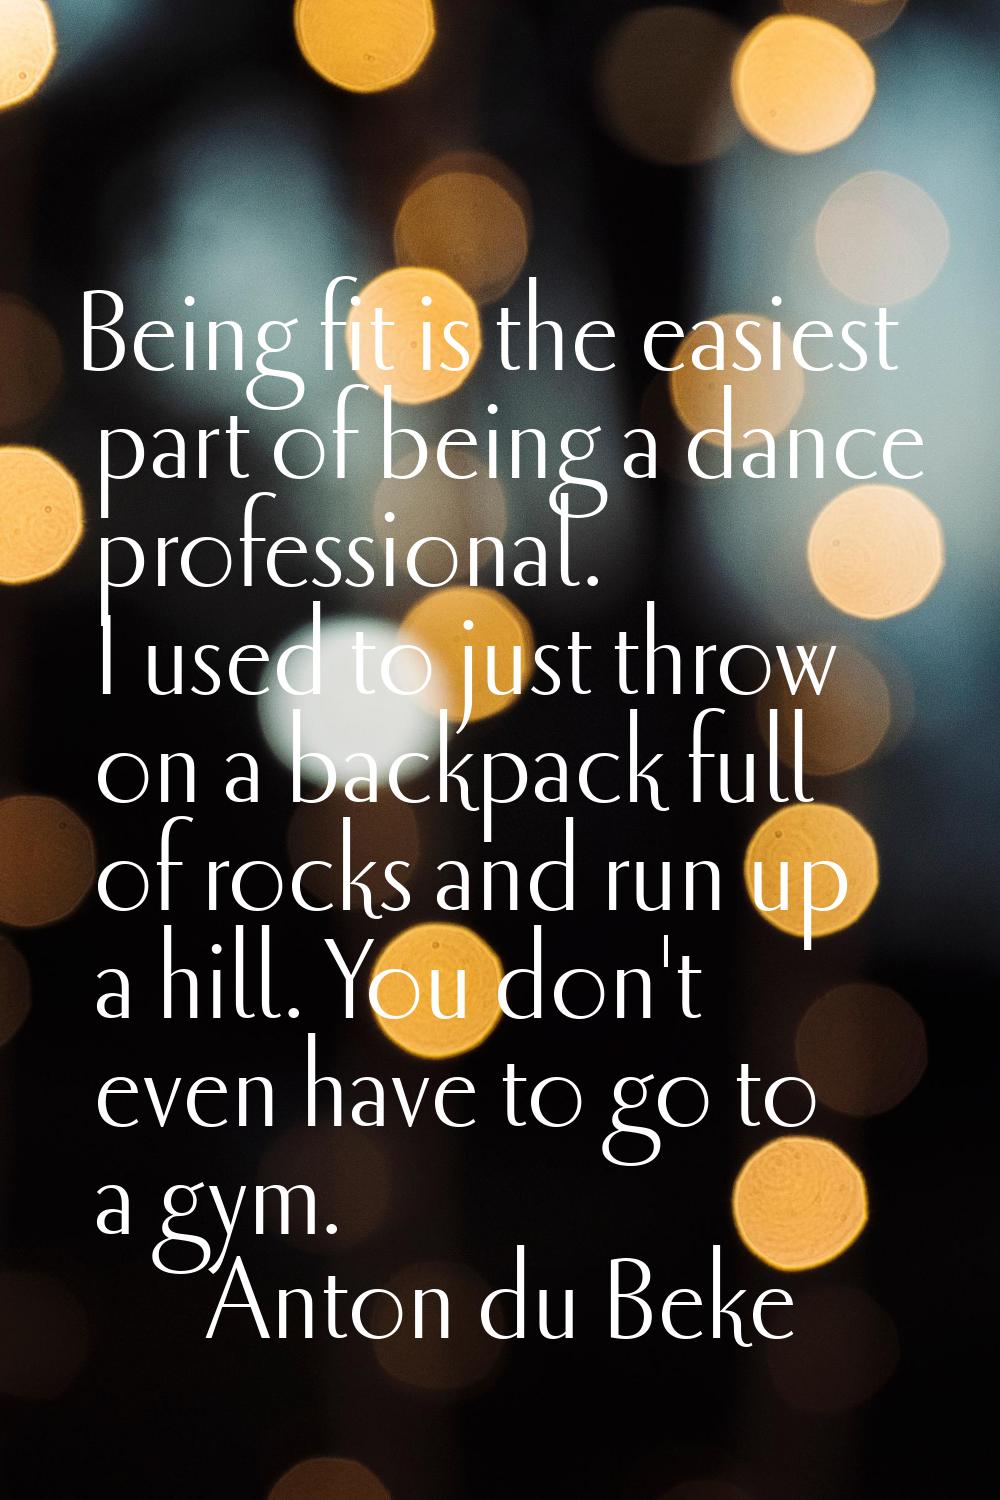 Being fit is the easiest part of being a dance professional. I used to just throw on a backpack ful